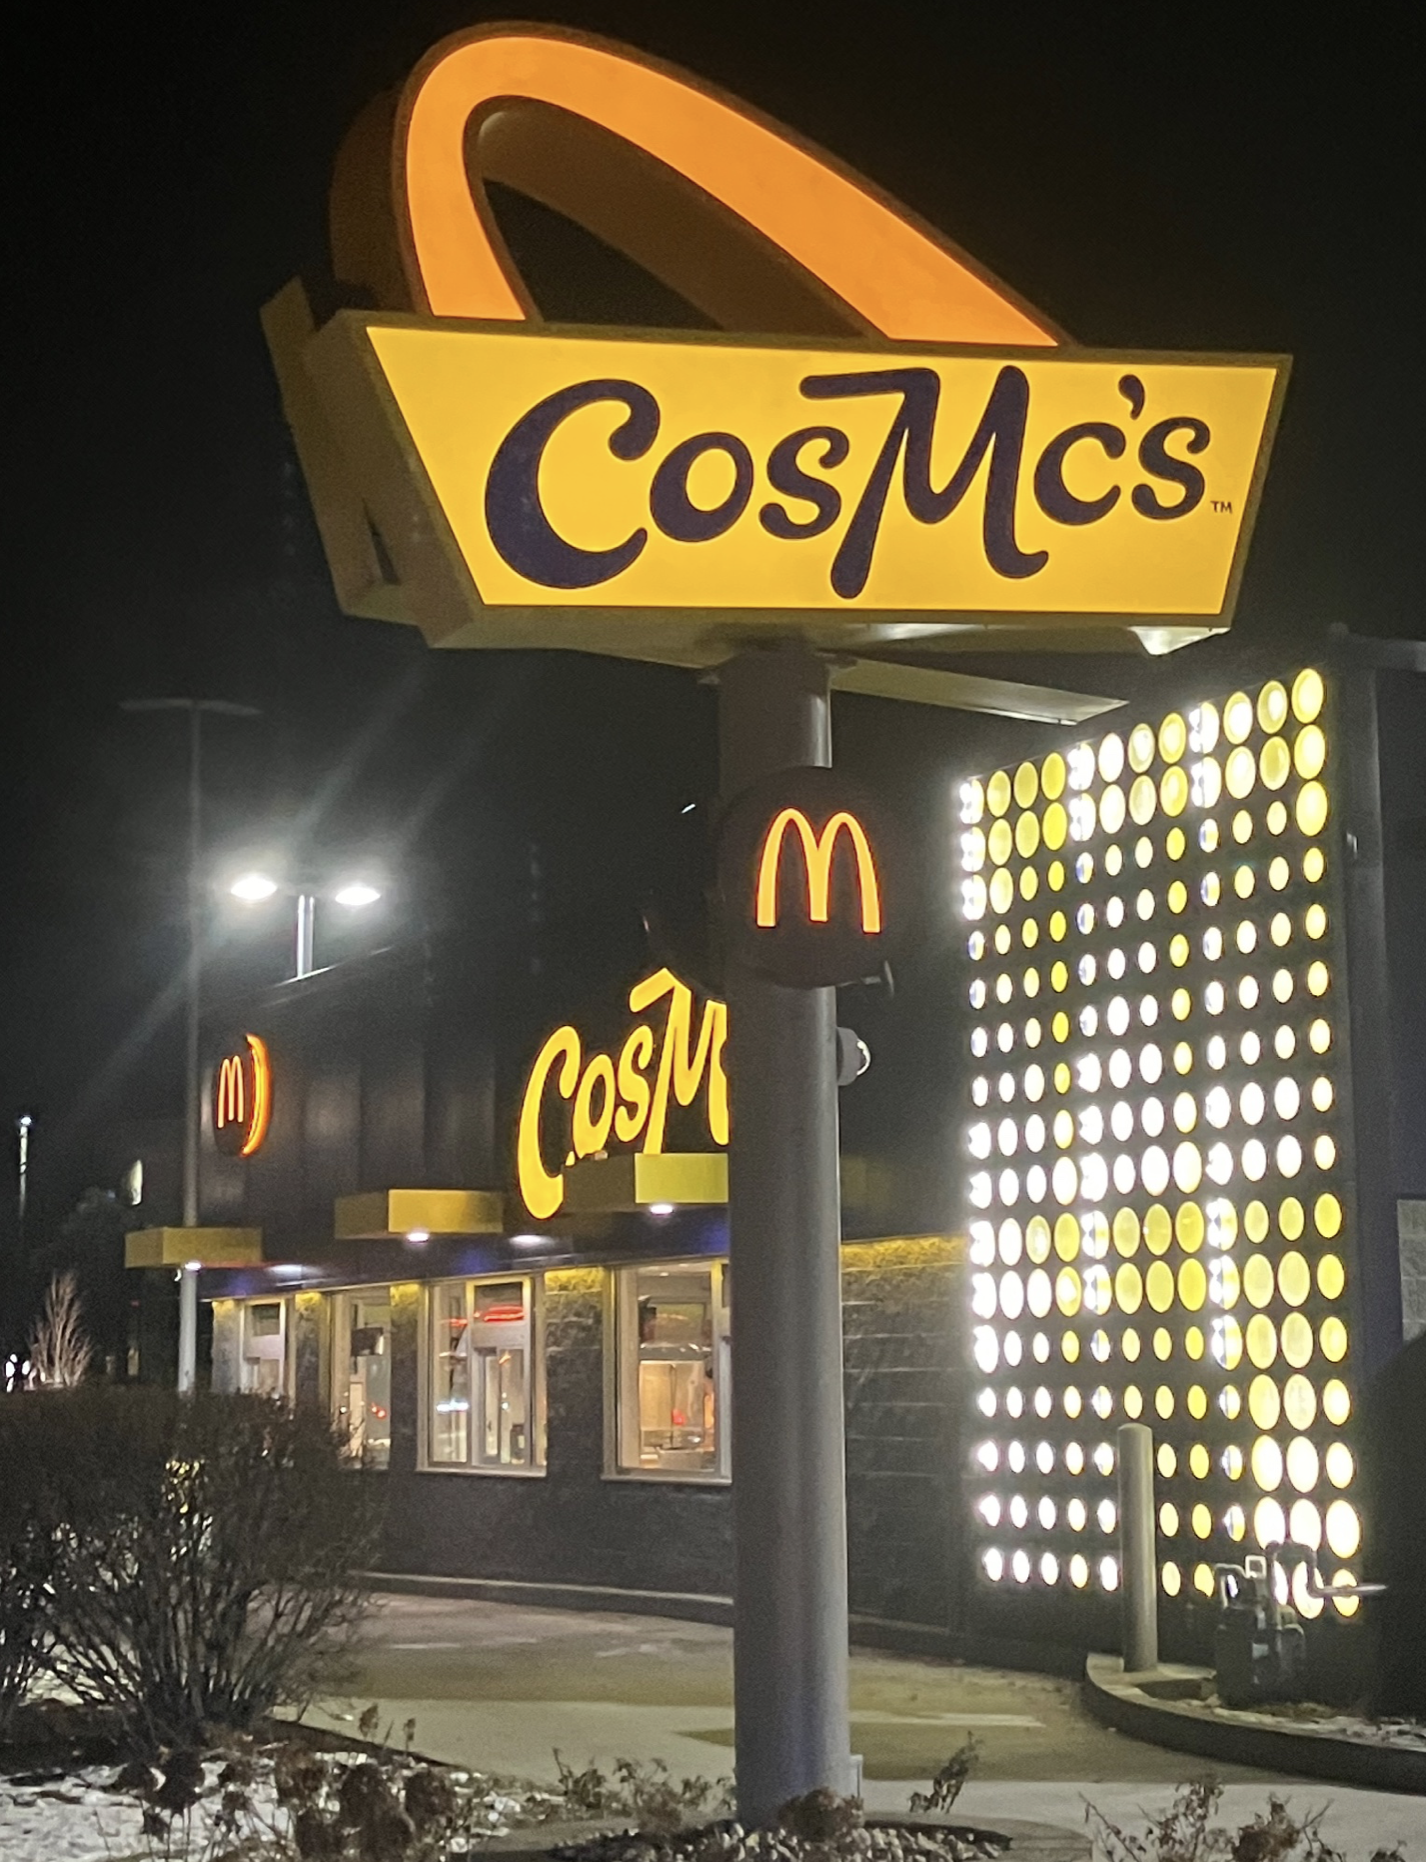 McDonald’s New Secret Chain CosMc’s Nears Opening of First Store Outside of Chicago